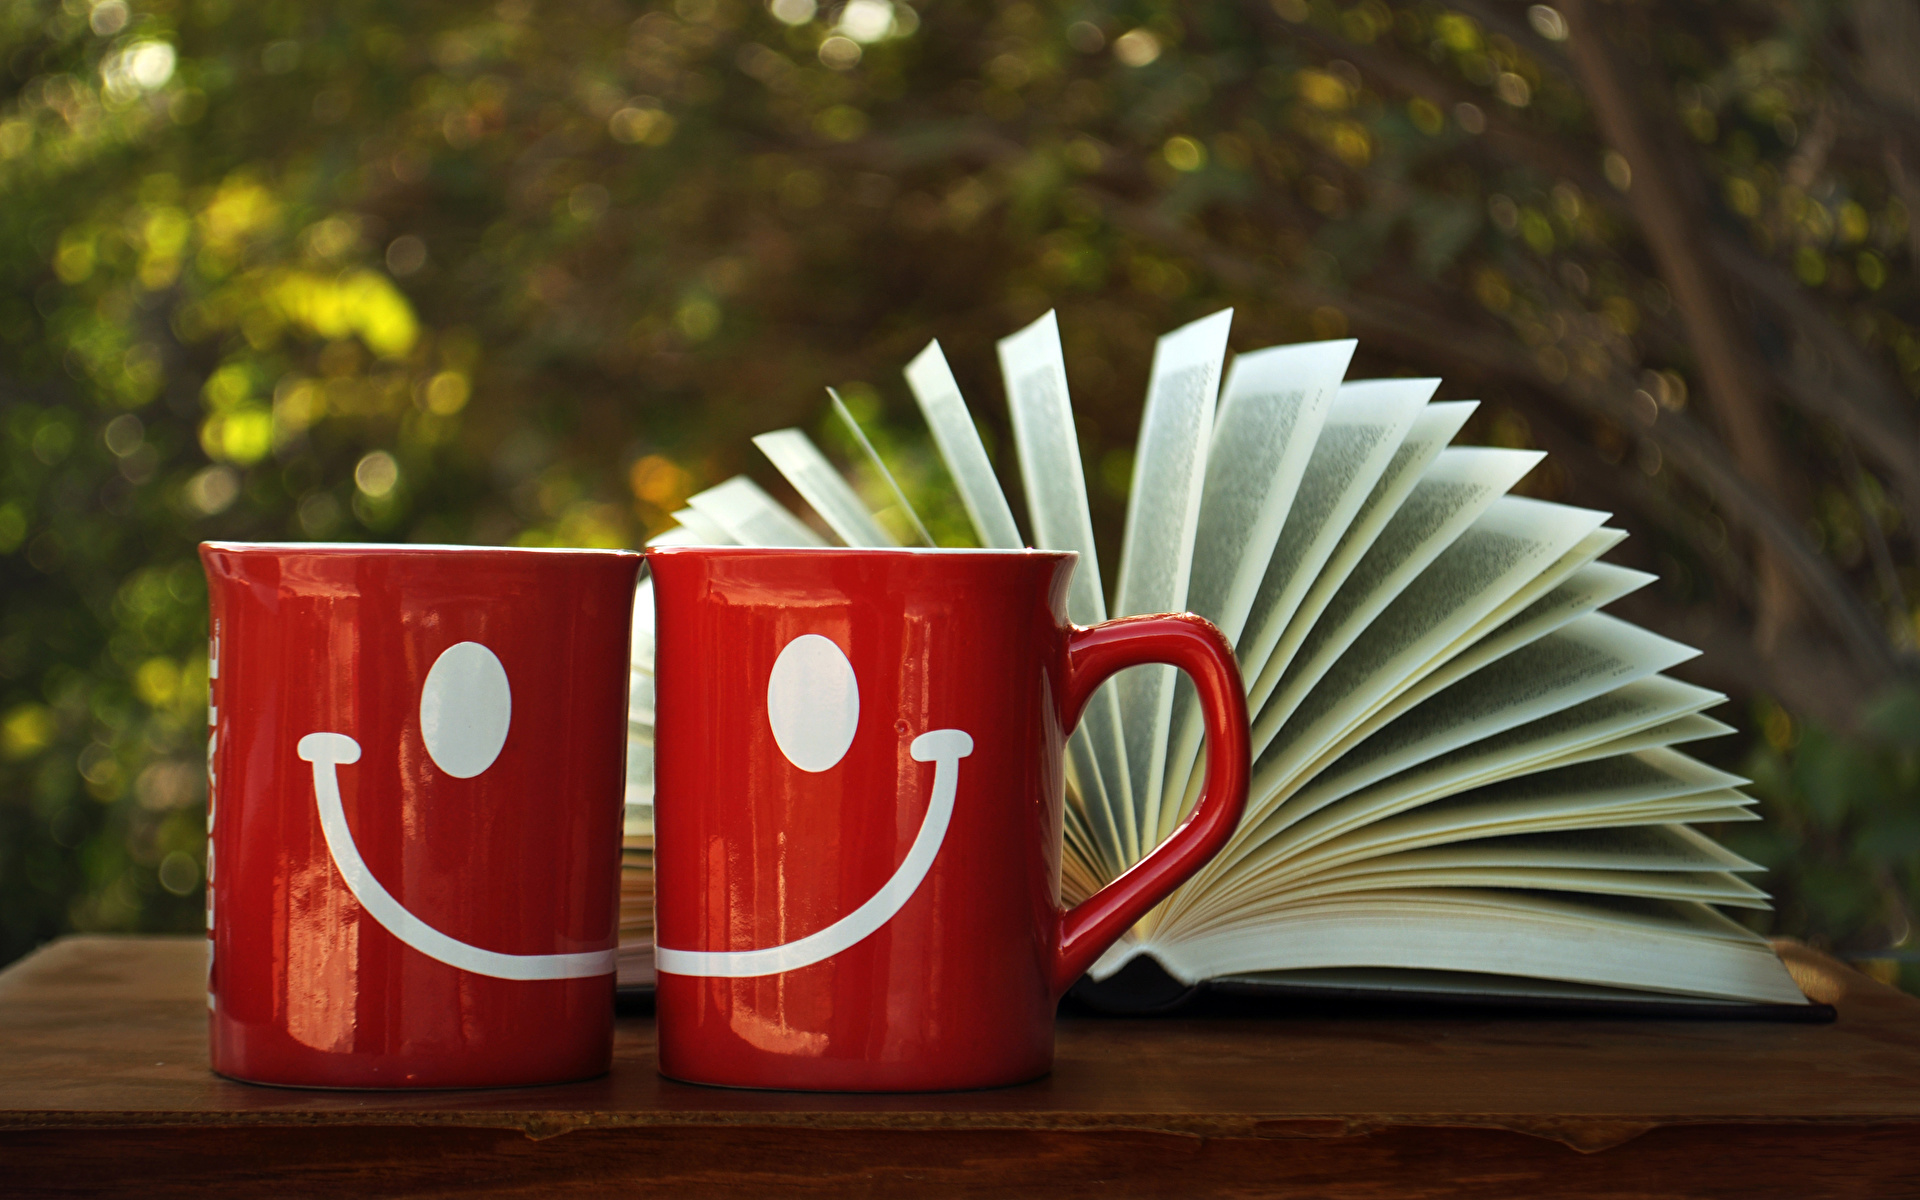 Photos Smile pages Mug Book 1920x1200 Page books